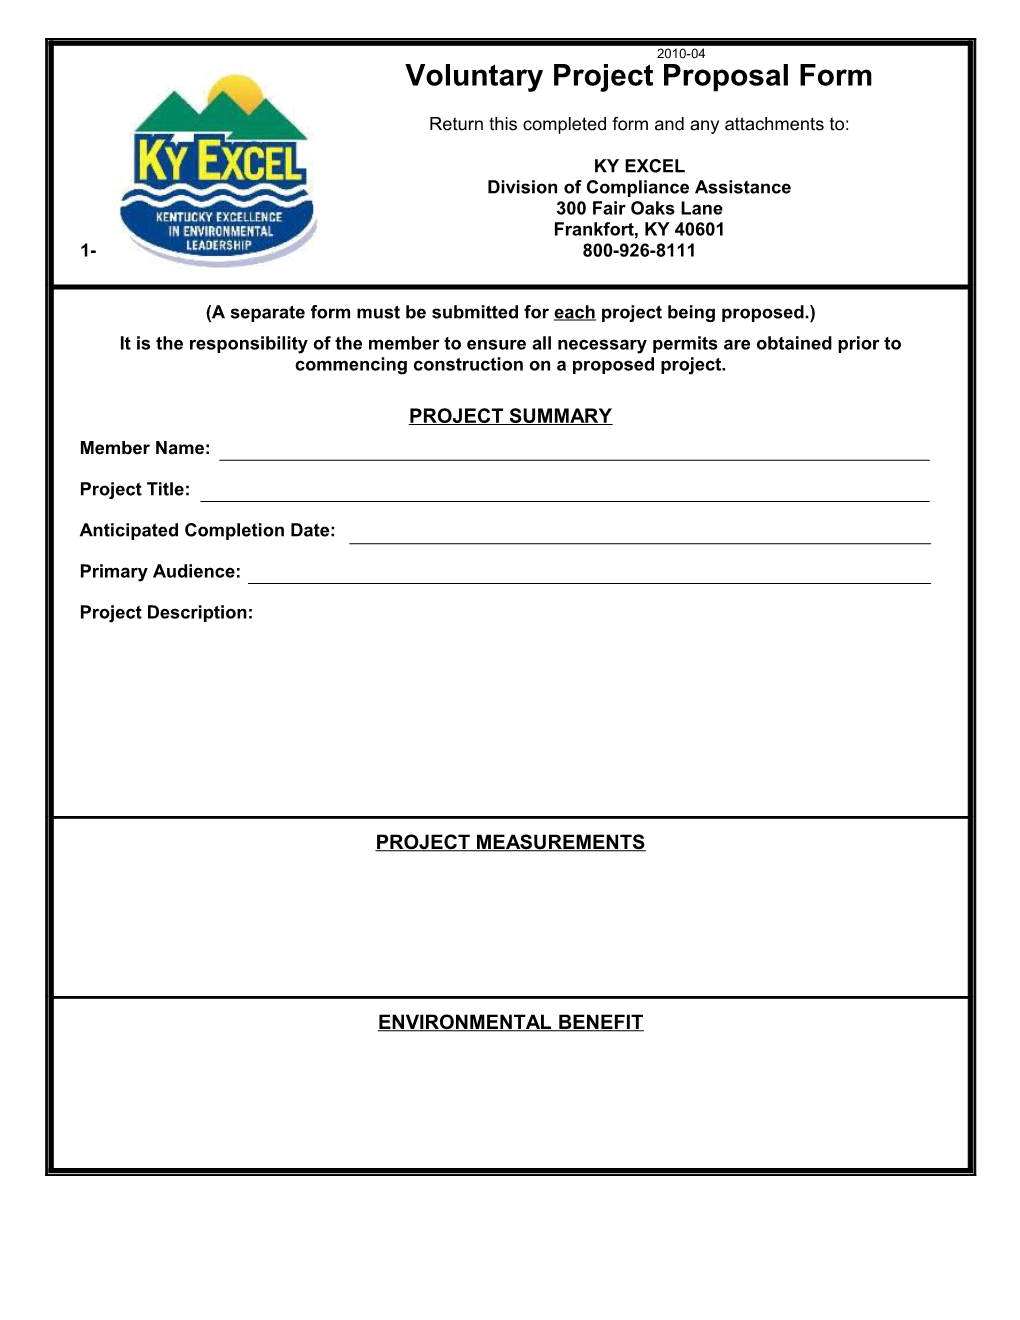 KY EXCEL Project Proposal Form